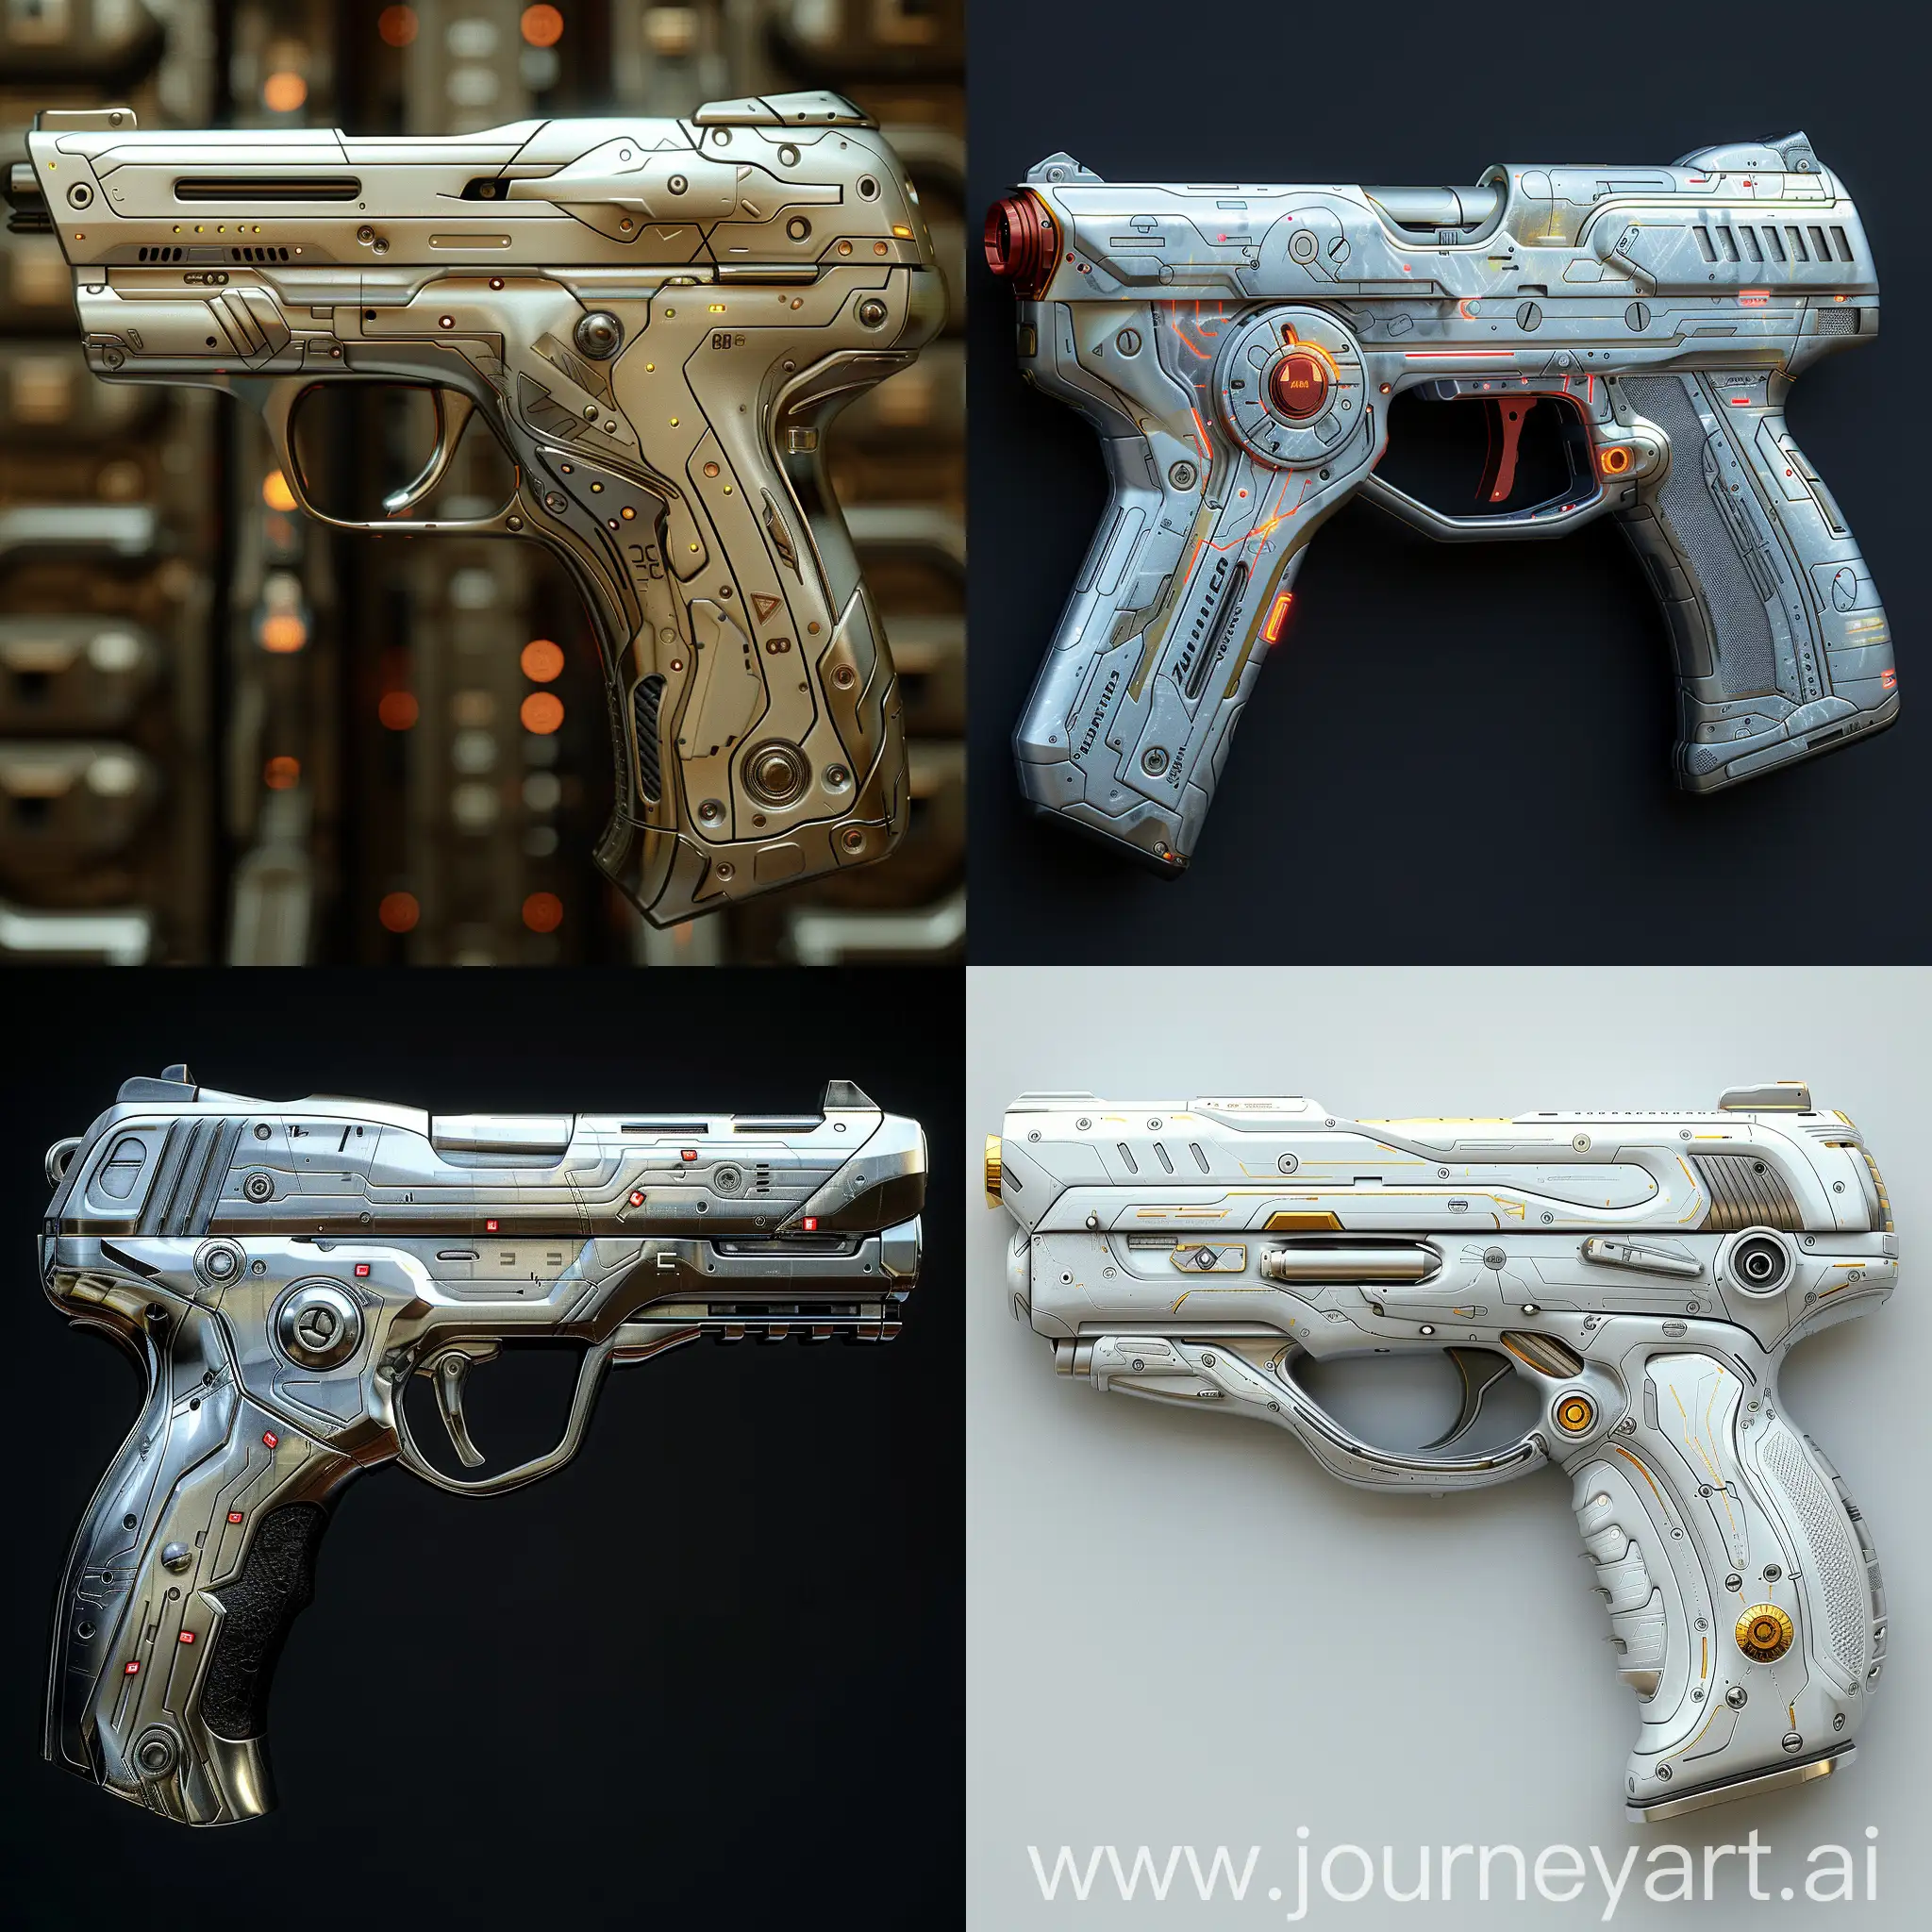 Stainless-Steel-Futuristic-Pistol-with-Electrically-Conductive-Features